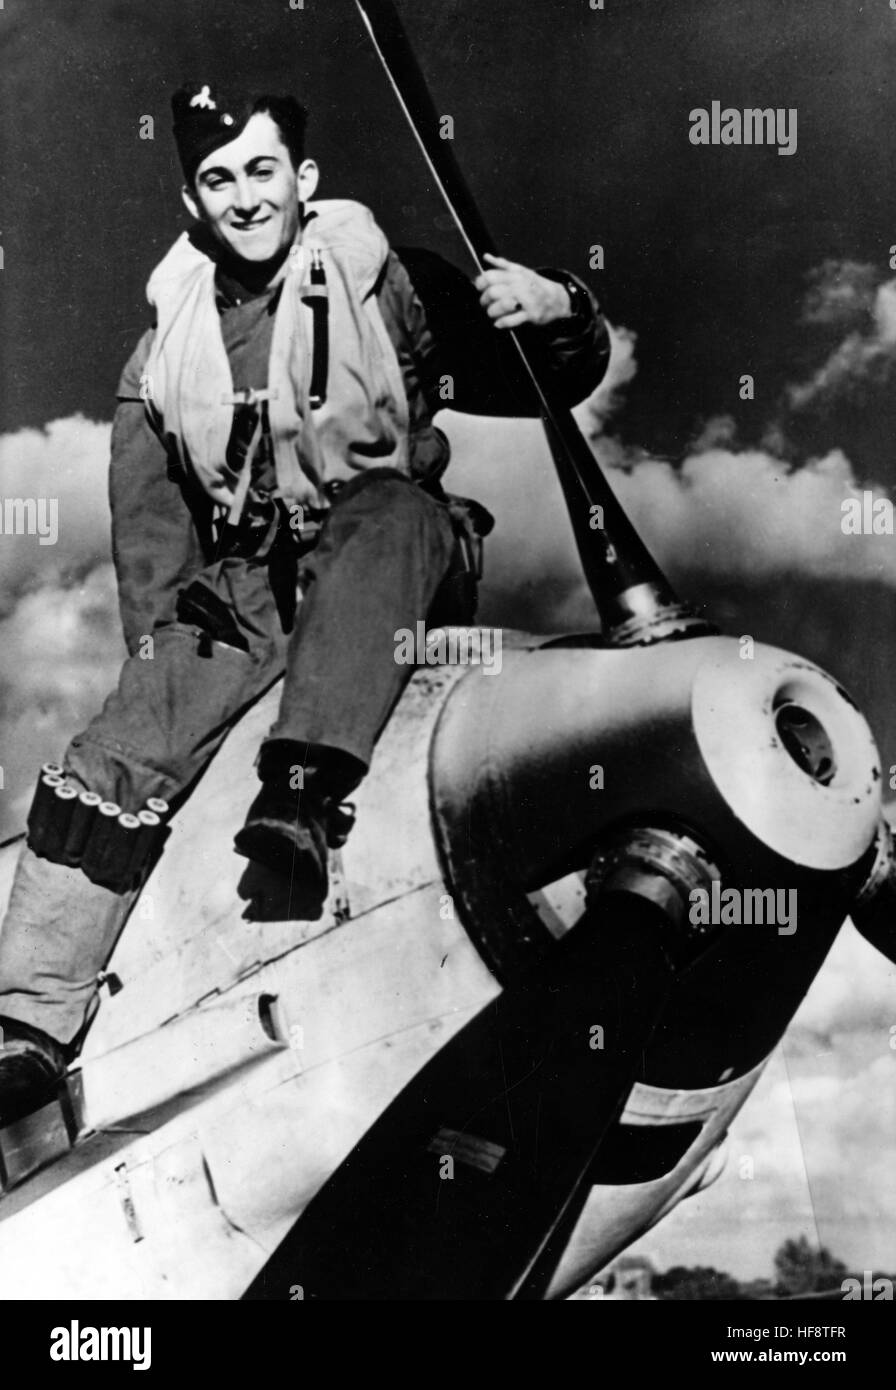 The Nazi propaganda image shows a young combat pilot of the German Luftwaffe on his Messerschmitt Bf 109 warplane. Published in November 1940. The Nazi reporter has written on the reverse of the picture on 07.11.1940, 'The 'Squirt' of the fighter squadron. Young as he may be, he has already successfully carried out more than 30 sorties. The foundations of his training were laid in his time in the Hitler Youth.' Fotoarchiv für Zeitgeschichte - NO WIRE SERVICE -   | usage worldwide Stock Photo